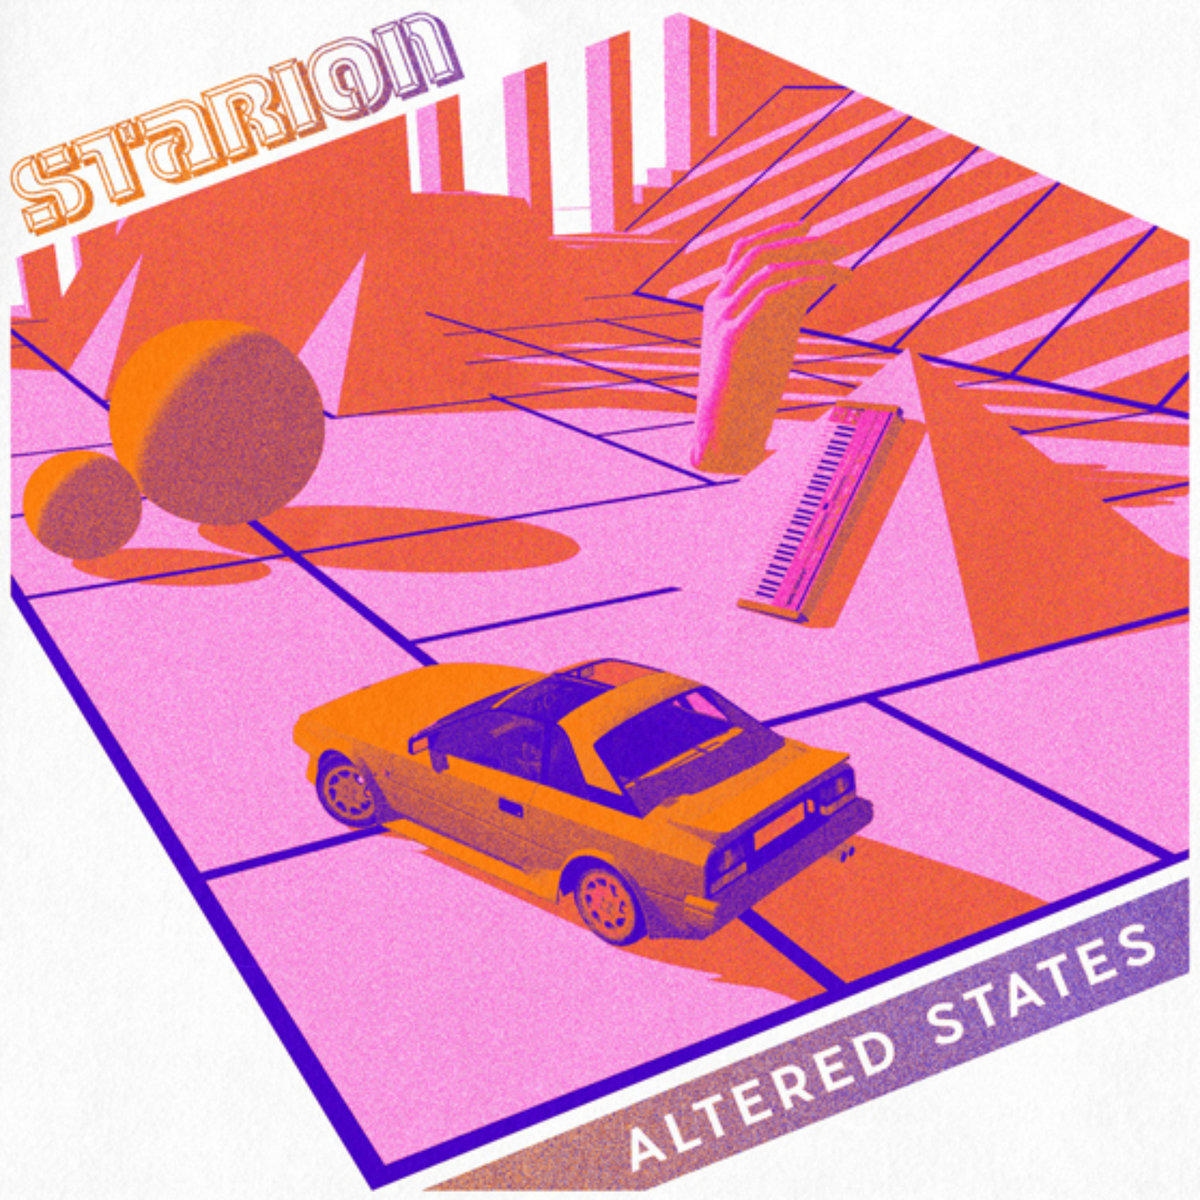 Starion/ALTERED STATES EP 12"